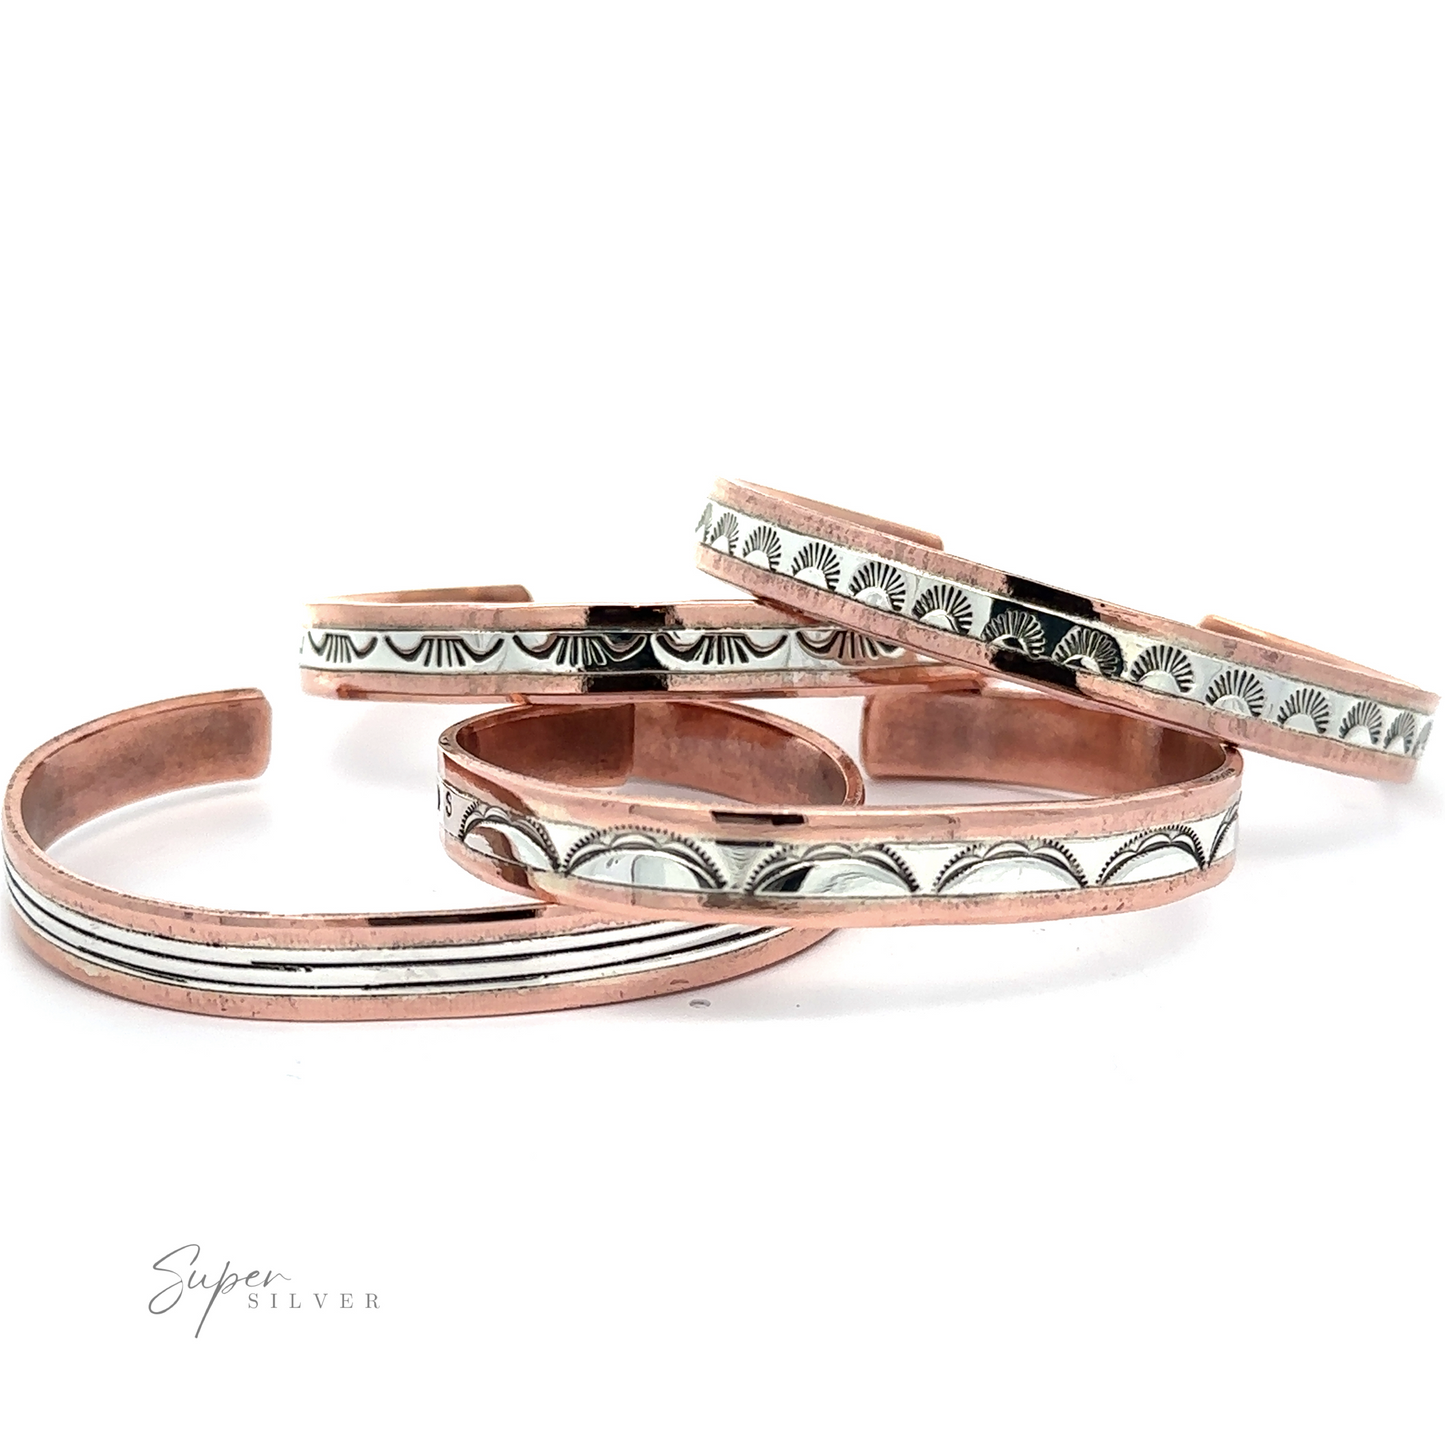 A stunning array of Native American Handmade Copper And Silver Bracelet, each adorned with intricate engraved patterns, are displayed on a white background. The text "Super Silver" is elegantly visible in the bottom left corner.